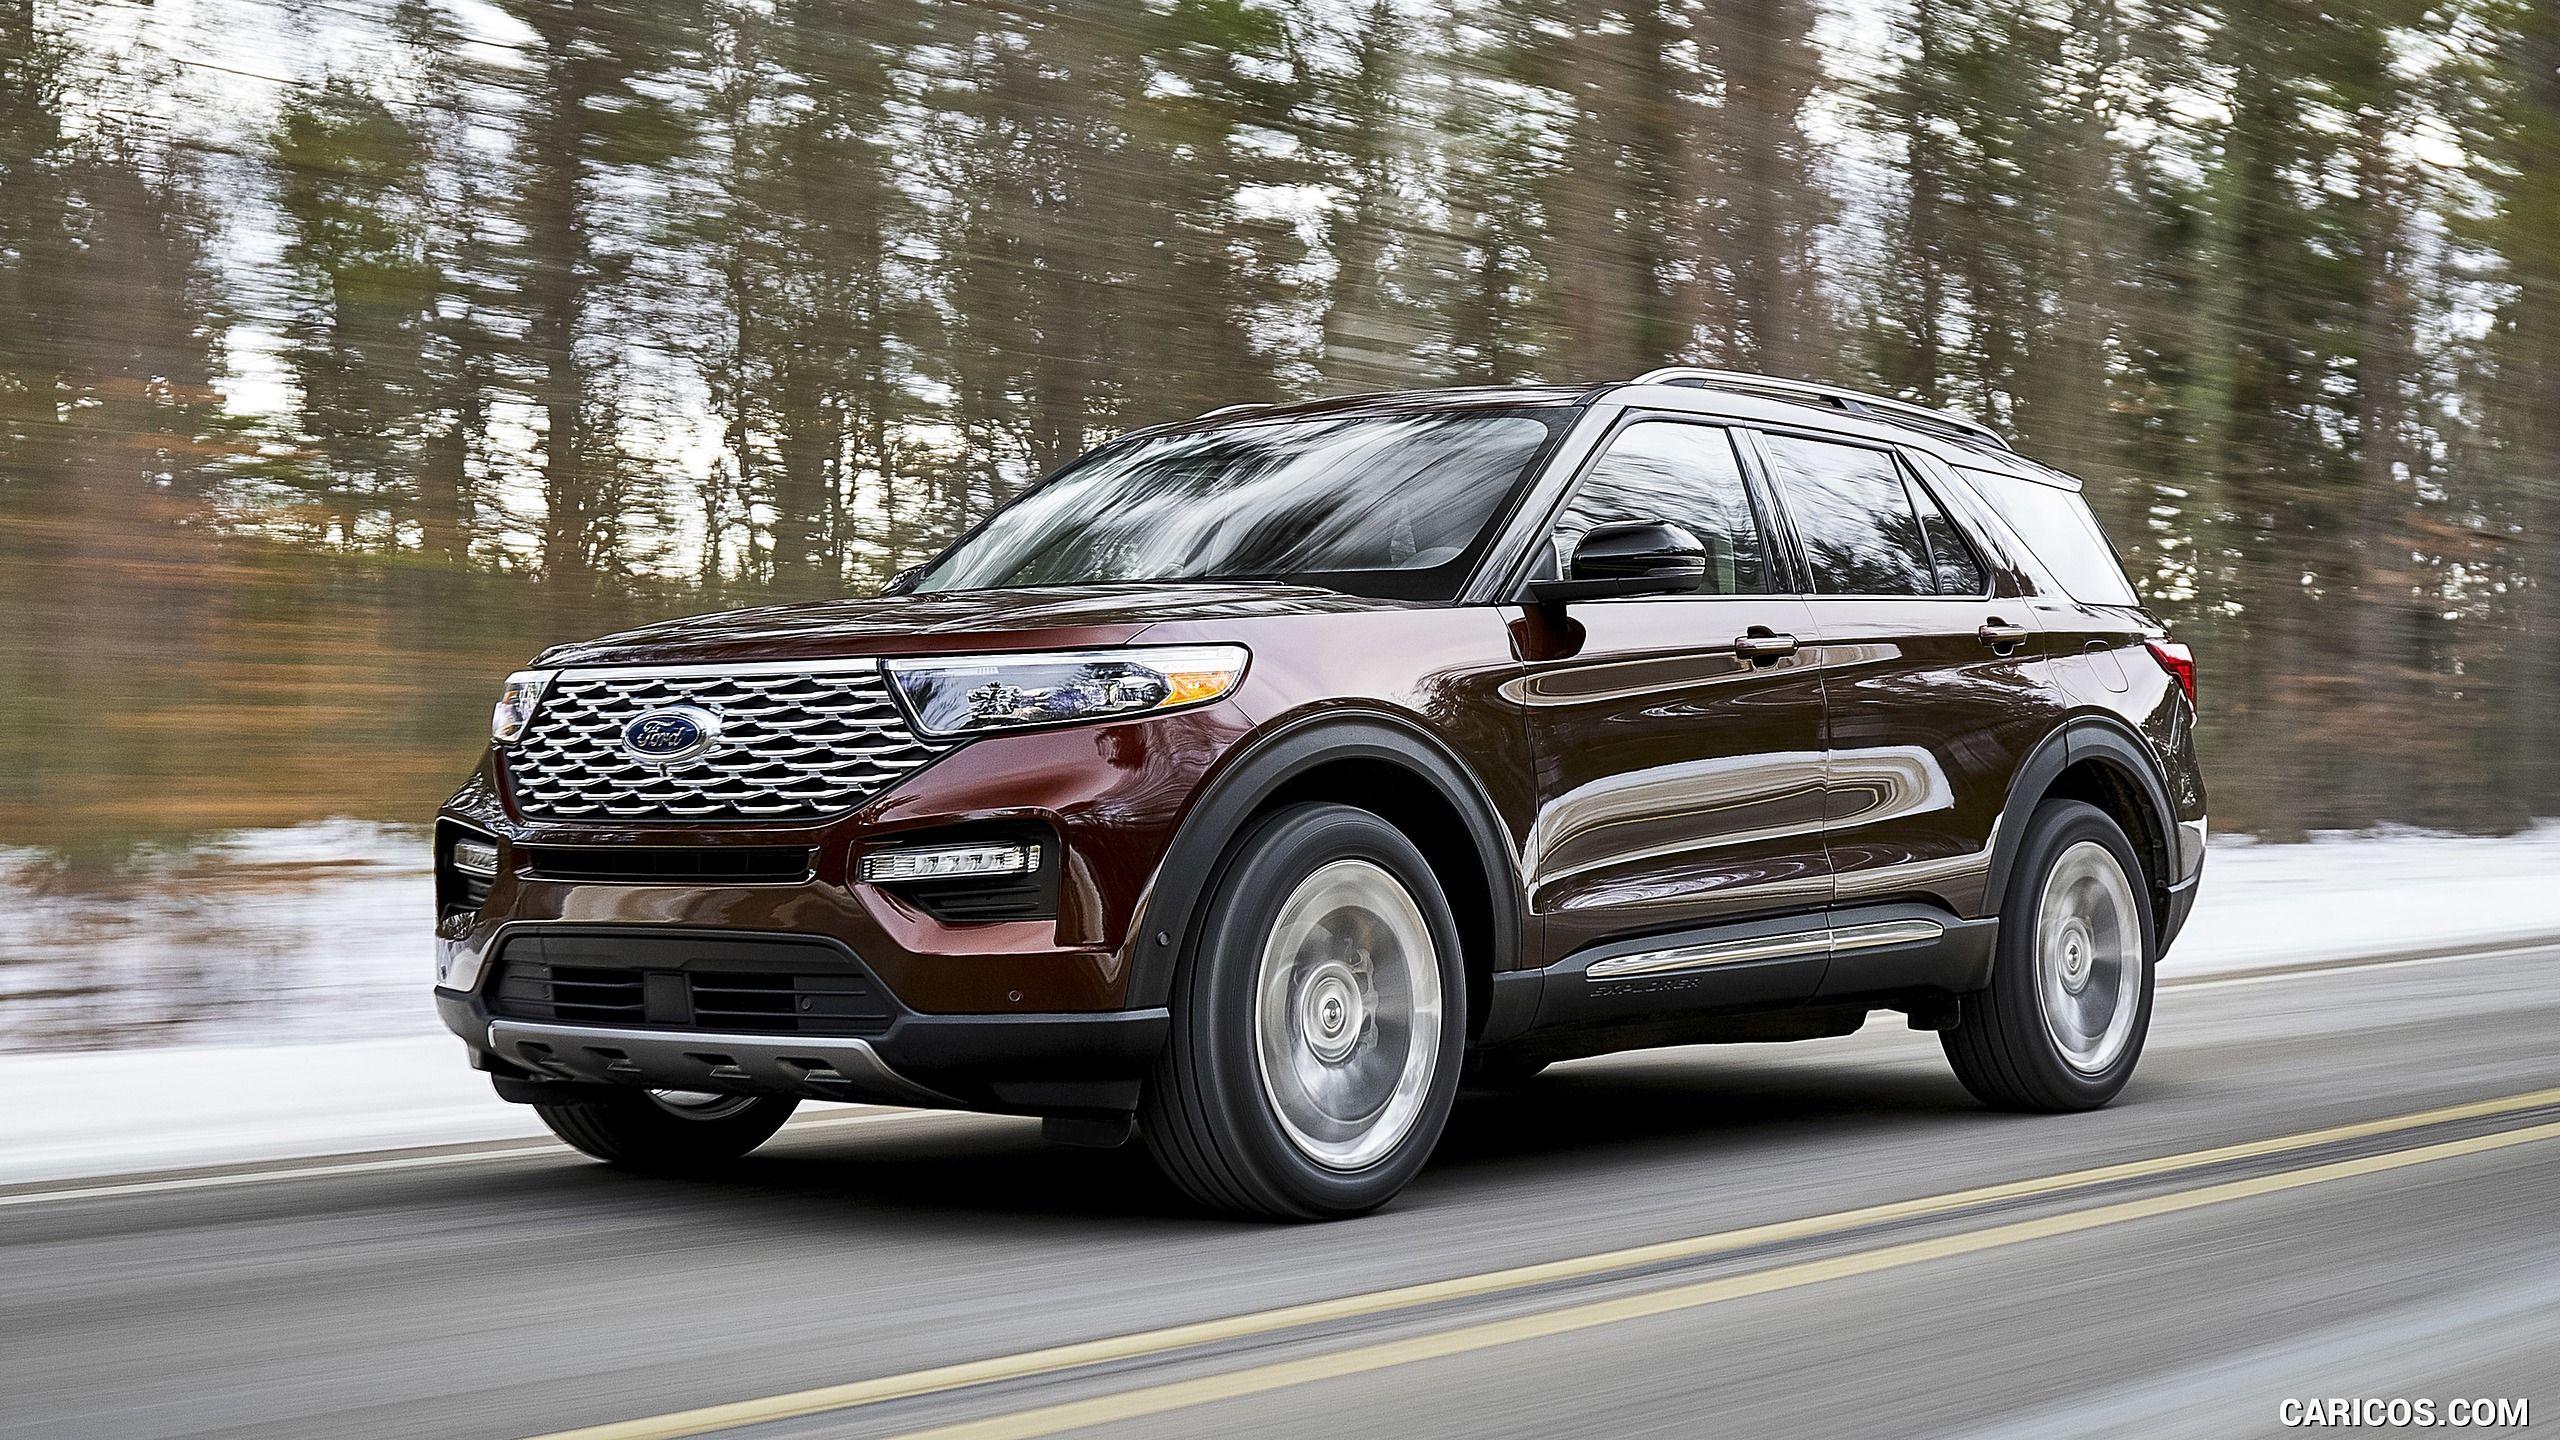 Ford Explorer Wallpapers Top Free Ford Explorer Backgrounds Wallpaperaccess